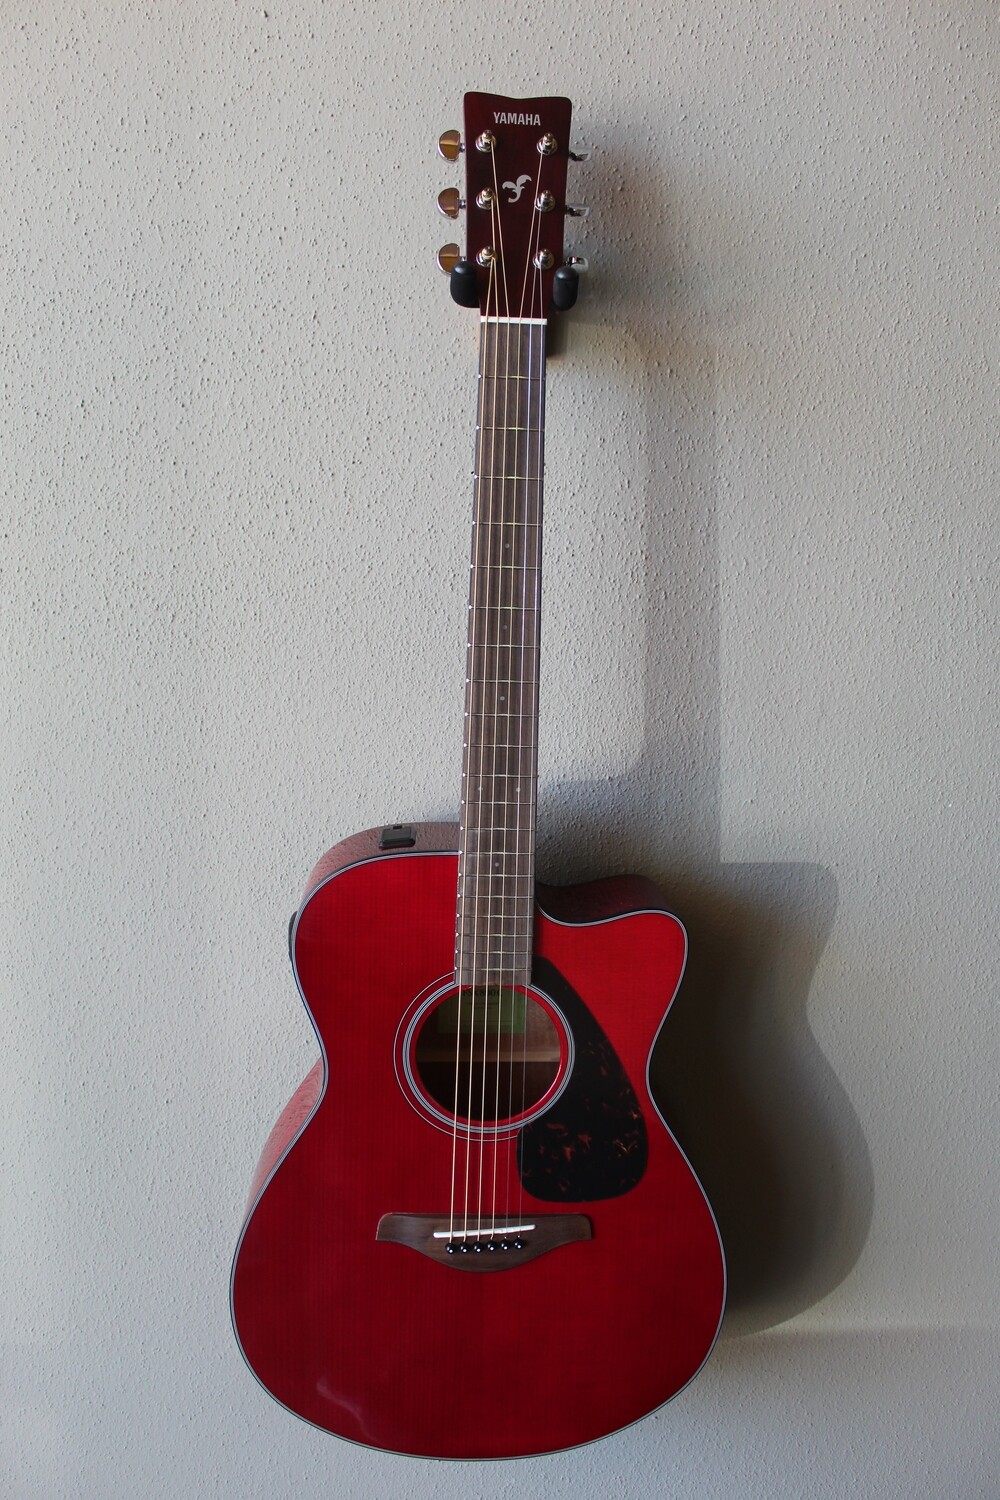 Yamaha FSX800C Concert Cutaway Acoustic/Electric Guitar with Gig Bag - Ruby Red